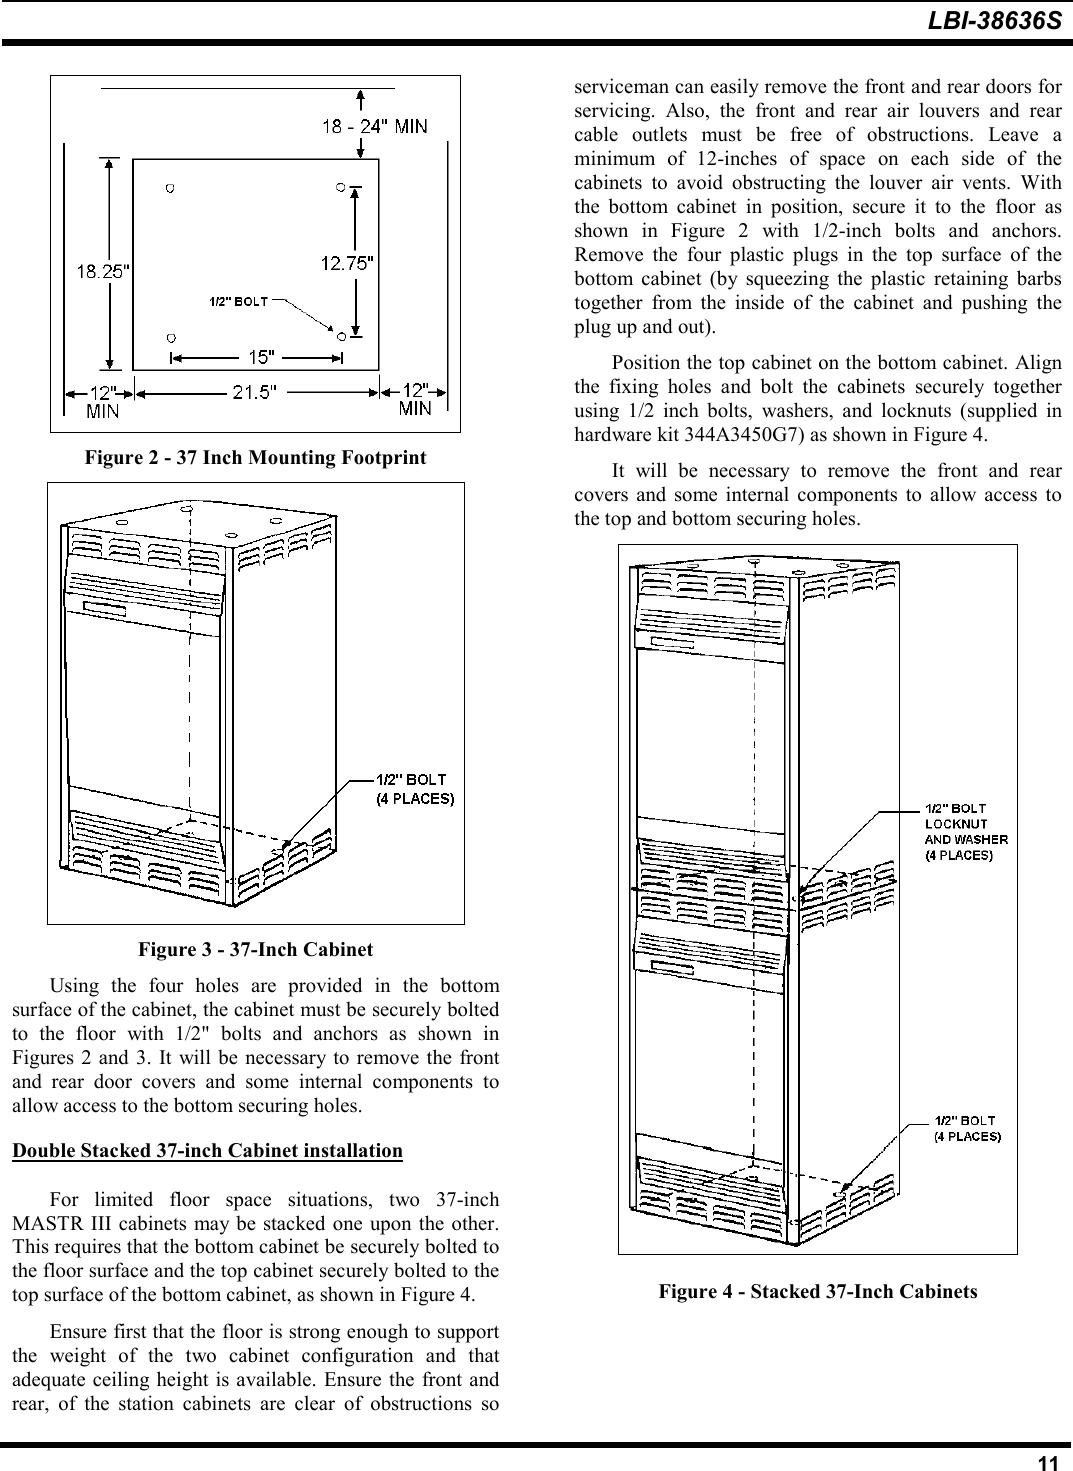 LBI-38636S11Figure 2 - 37 Inch Mounting FootprintFigure 3 - 37-Inch CabinetUsing the four holes are provided in the bottomsurface of the cabinet, the cabinet must be securely boltedto the floor with 1/2&quot; bolts and anchors as shown inFigures 2 and 3. It will be necessary to remove the frontand rear door covers and some internal components toallow access to the bottom securing holes.Double Stacked 37-inch Cabinet installationFor limited floor space situations, two 37-inchMASTR III cabinets may be stacked one upon the other.This requires that the bottom cabinet be securely bolted tothe floor surface and the top cabinet securely bolted to thetop surface of the bottom cabinet, as shown in Figure 4.Ensure first that the floor is strong enough to supportthe weight of the two cabinet configuration and thatadequate ceiling height is available. Ensure the front andrear, of the station cabinets are clear of obstructions soserviceman can easily remove the front and rear doors forservicing. Also, the front and rear air louvers and rearcable outlets must be free of obstructions. Leave aminimum of 12-inches of space on each side of thecabinets to avoid obstructing the louver air vents. Withthe bottom cabinet in position, secure it to the floor asshown in Figure 2 with 1/2-inch bolts and anchors.Remove the four plastic plugs in the top surface of thebottom cabinet (by squeezing the plastic retaining barbstogether from the inside of the cabinet and pushing theplug up and out).Position the top cabinet on the bottom cabinet. Alignthe fixing holes and bolt the cabinets securely togetherusing 1/2 inch bolts, washers, and locknuts (supplied inhardware kit 344A3450G7) as shown in Figure 4.It will be necessary to remove the front and rearcovers and some internal components to allow access tothe top and bottom securing holes.Figure 4 - Stacked 37-Inch Cabinets